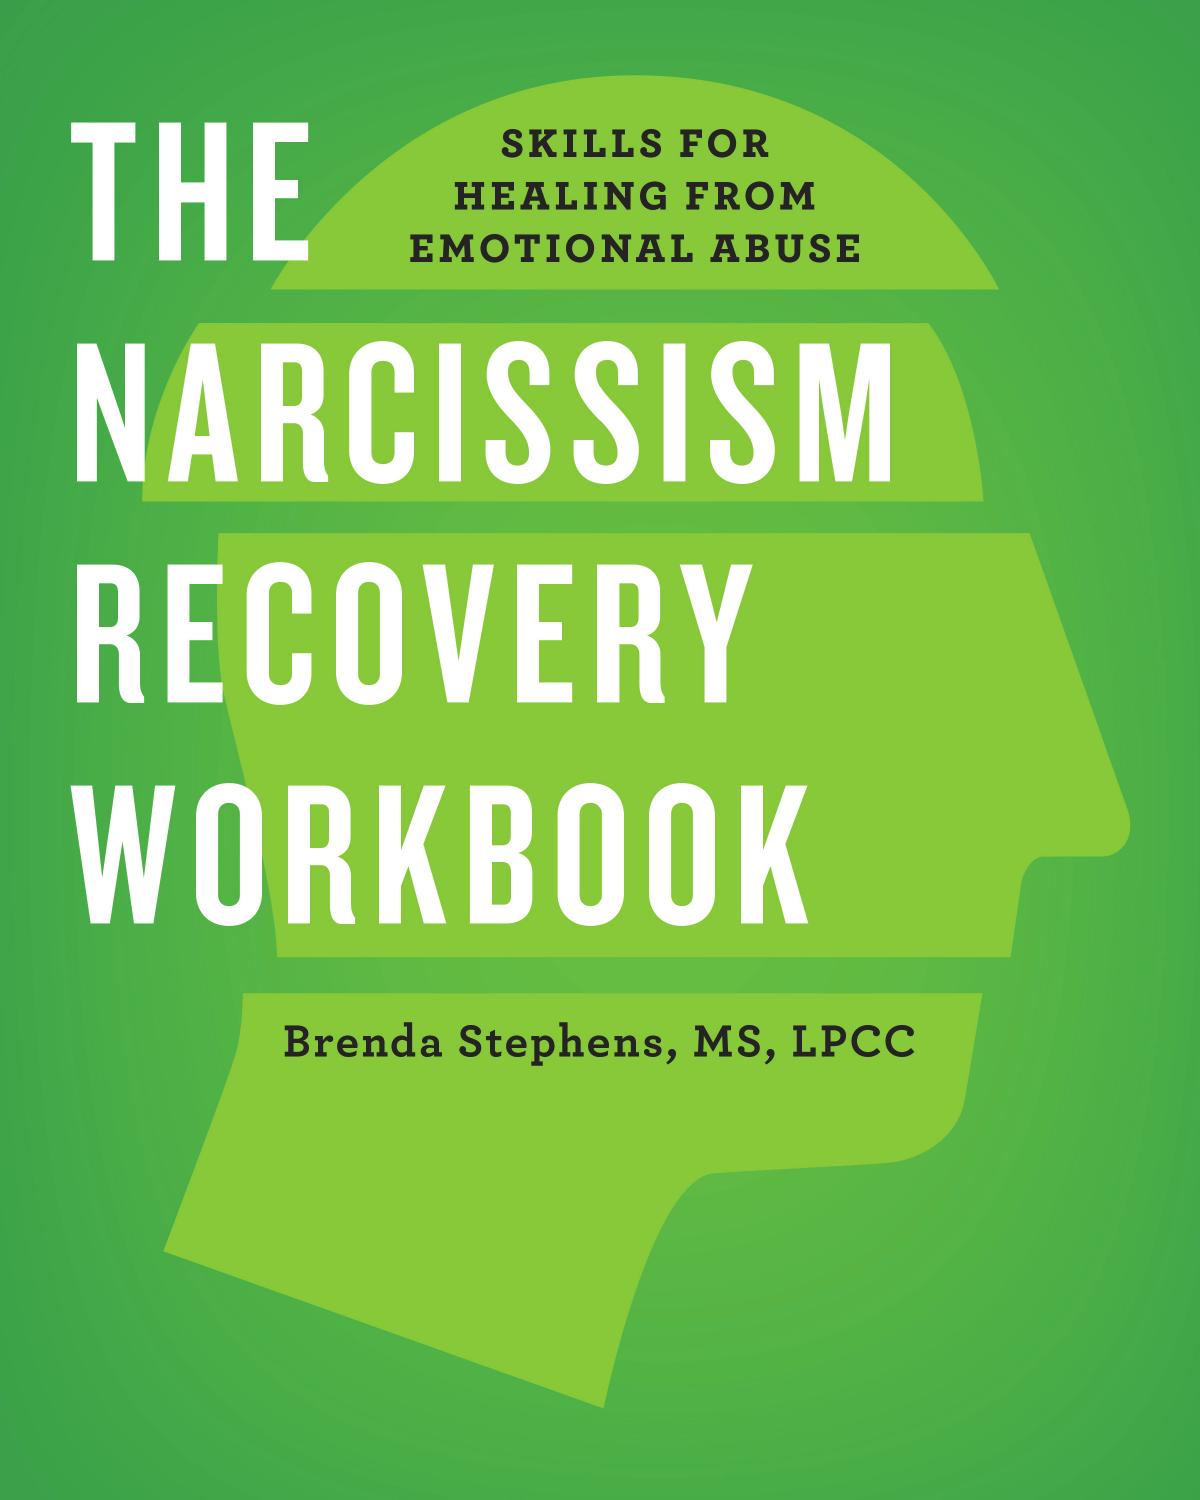 The Narcissism Recovery Workbook: Skills for Healing from Emotional Abuse by Brenda Stephens MS LPCC